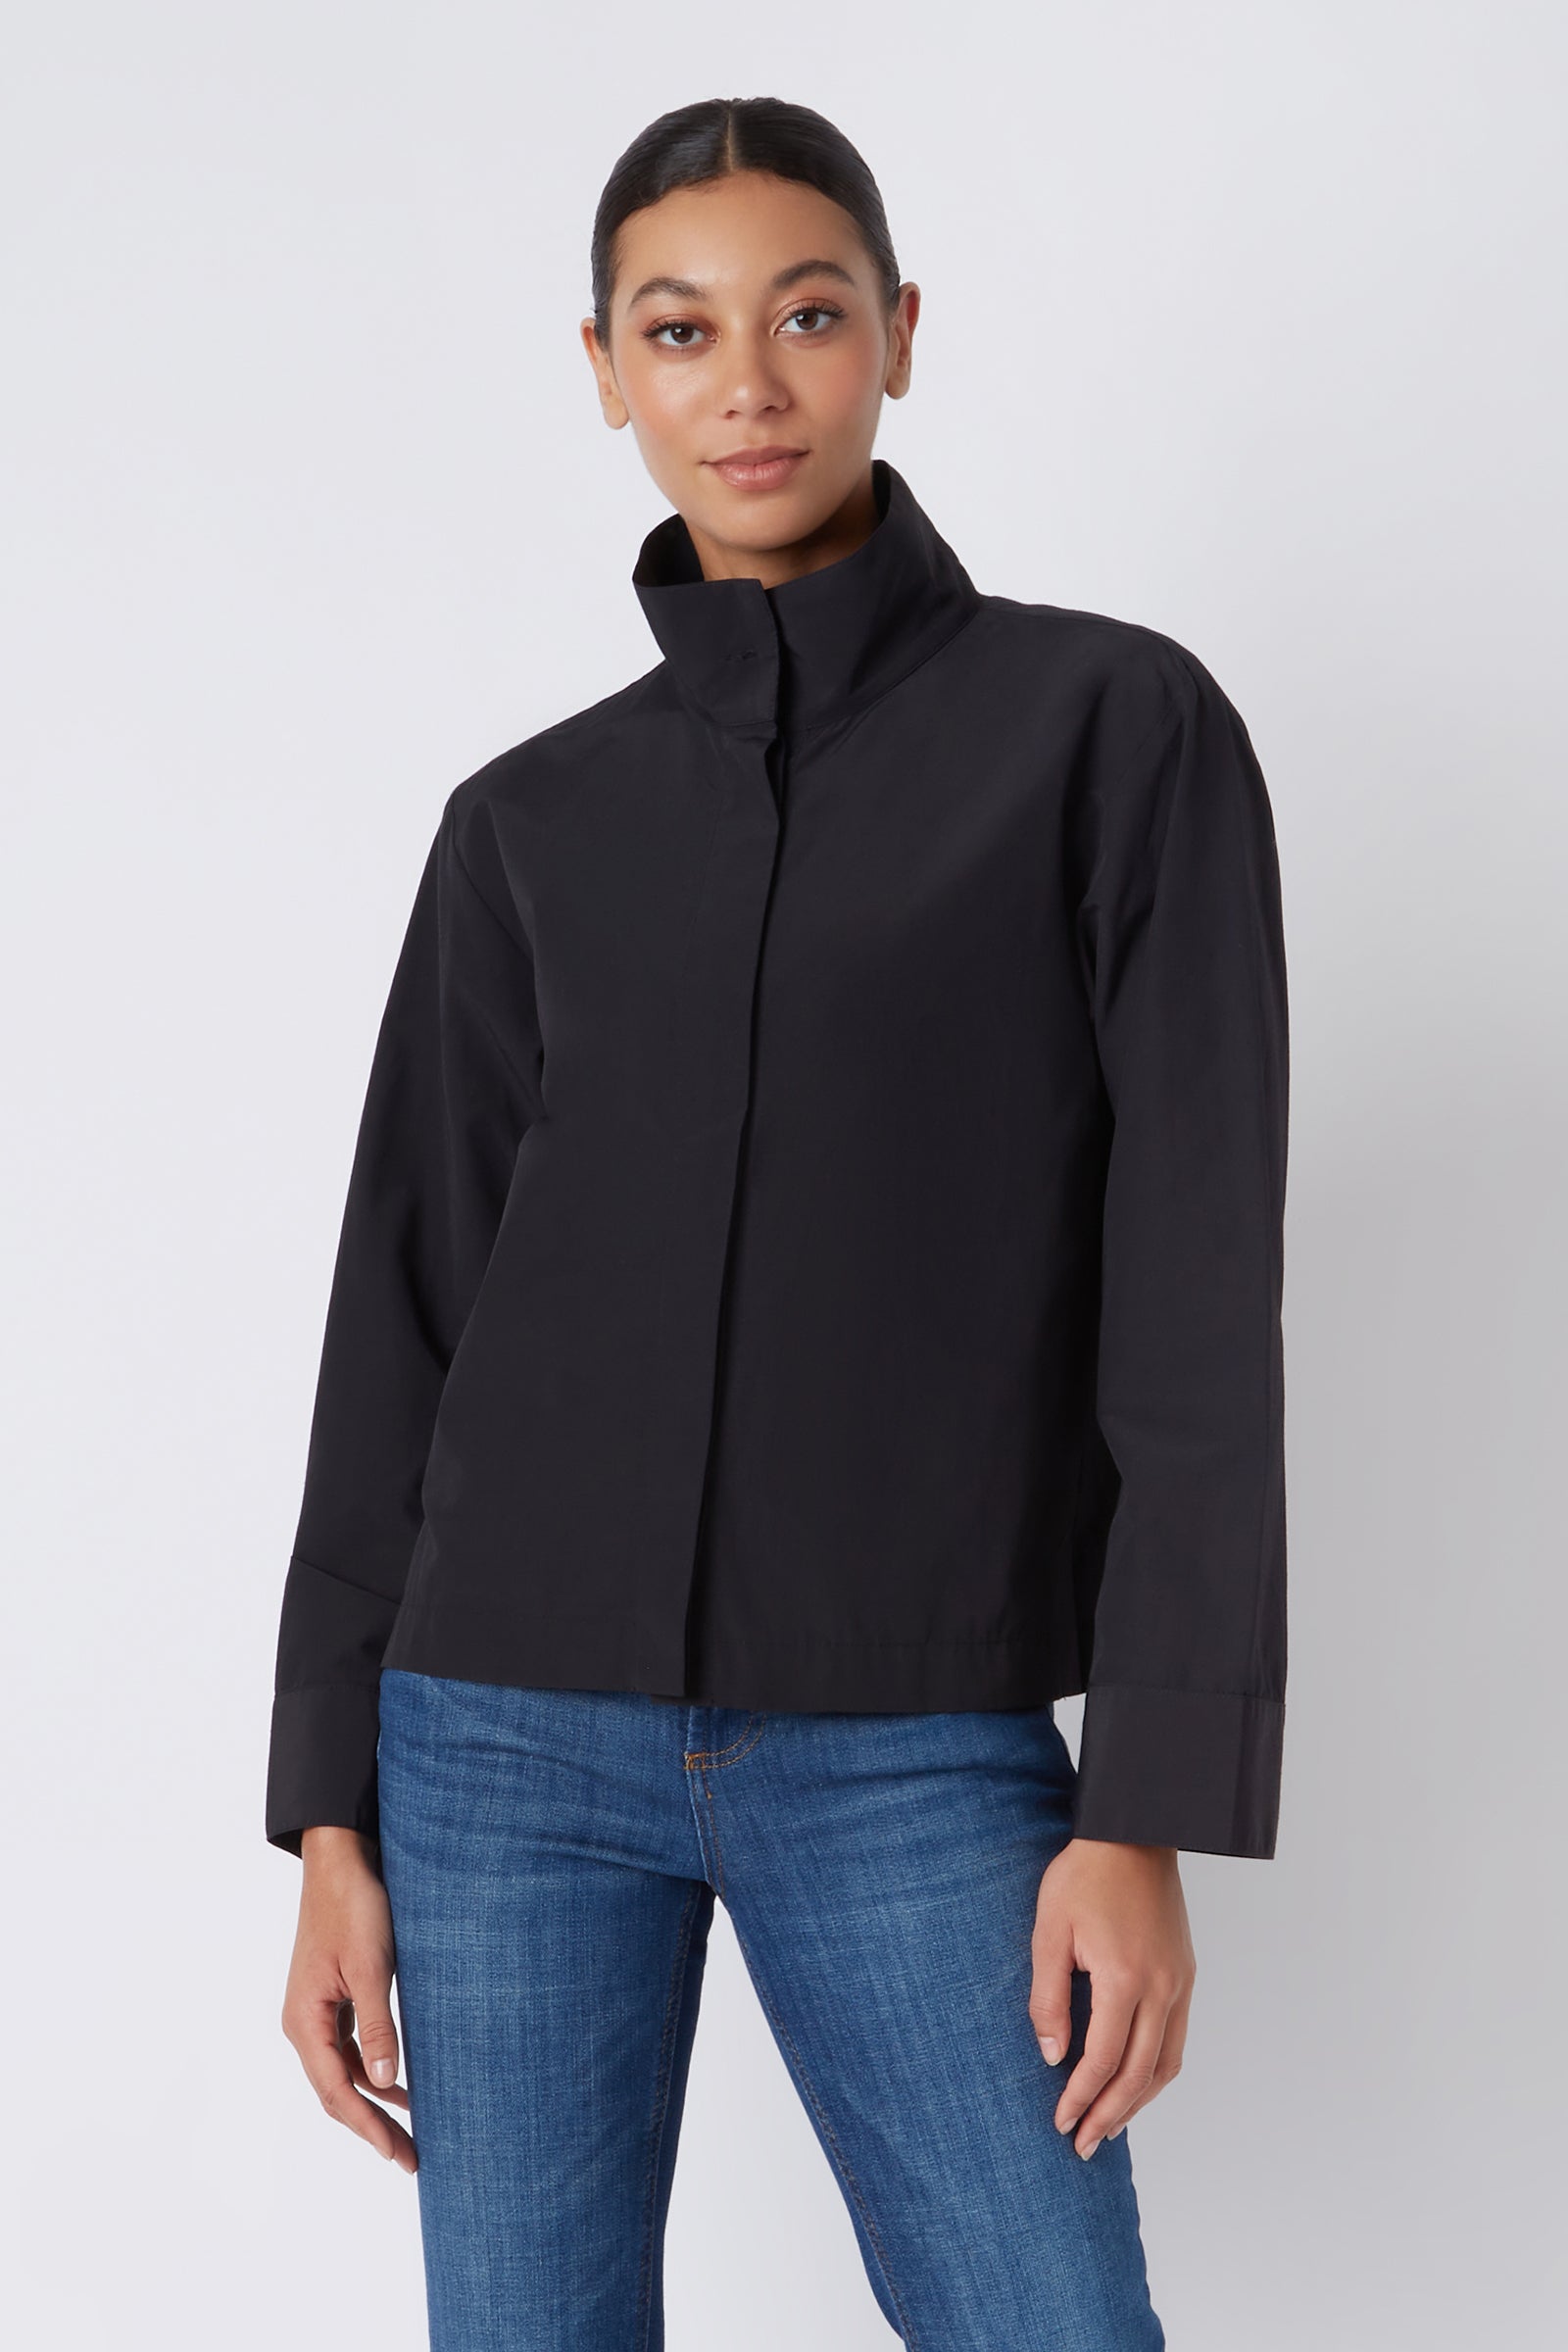 Kal Rieman Peggy Collared Shirt in Black on Model Cropped Front View